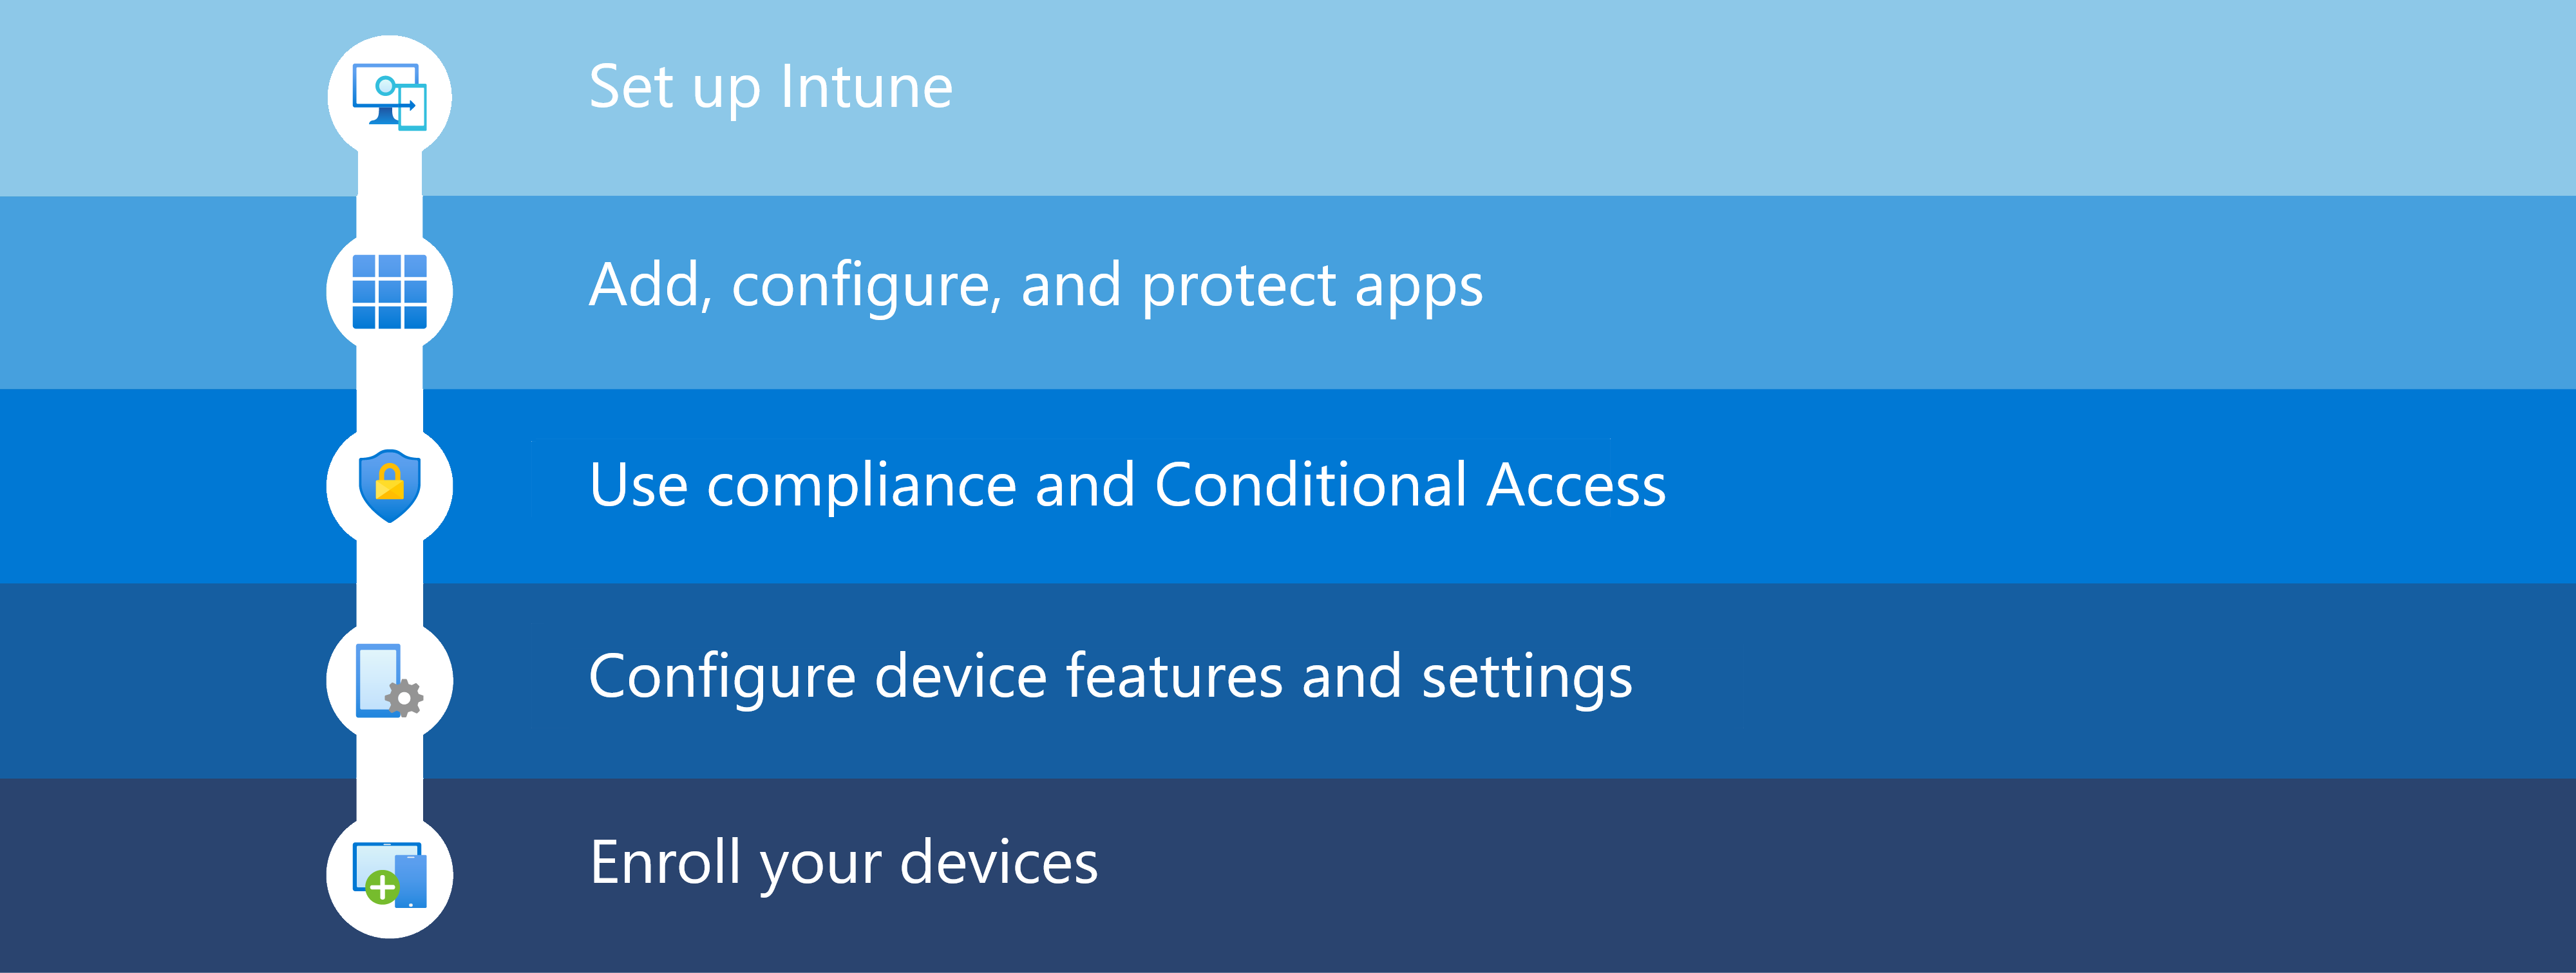 Steps to setup and deploy Intune